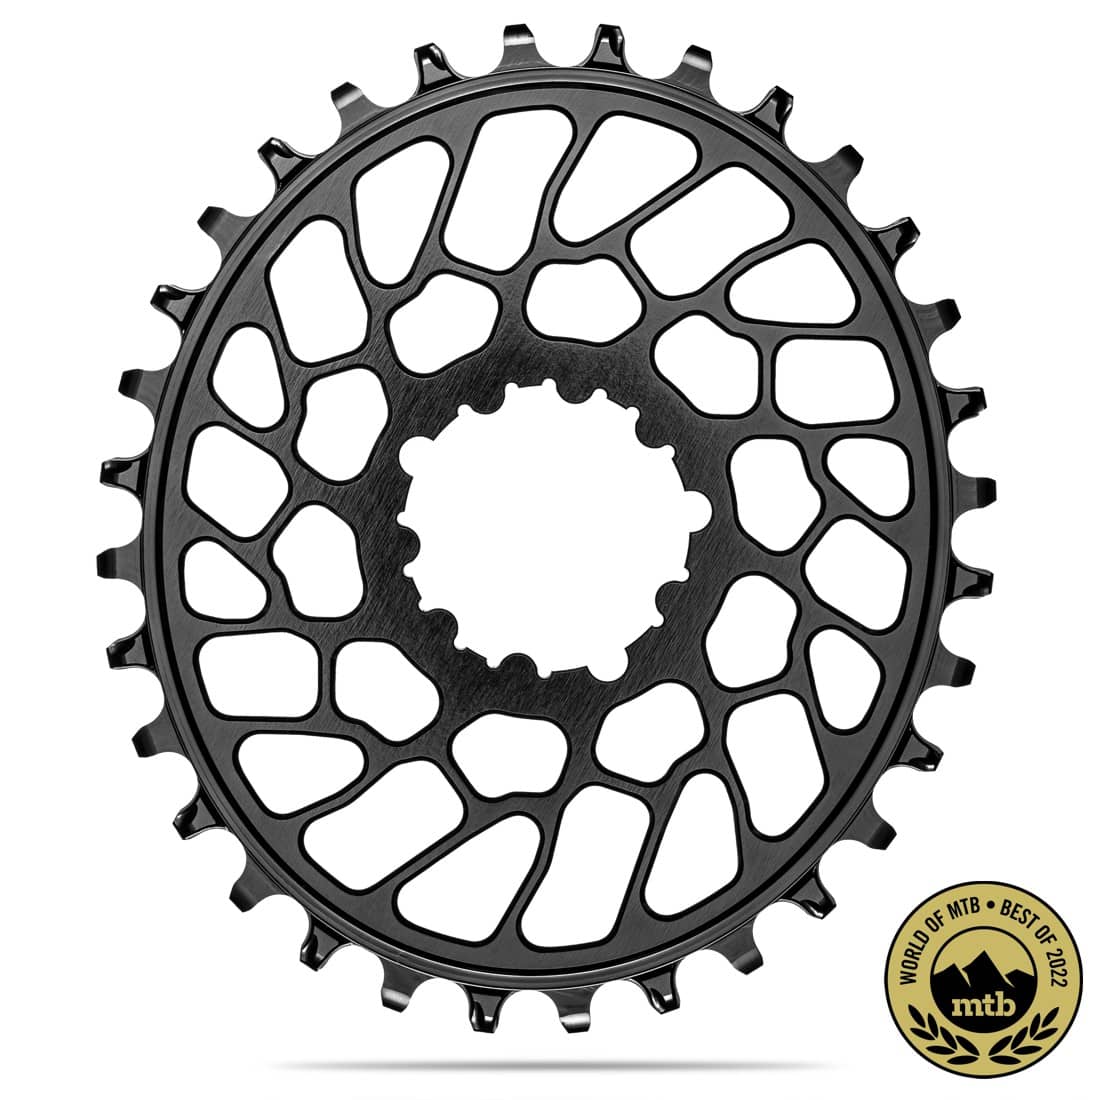 absoluteblack oval Super boost traction direct mount chainring for sram cranks